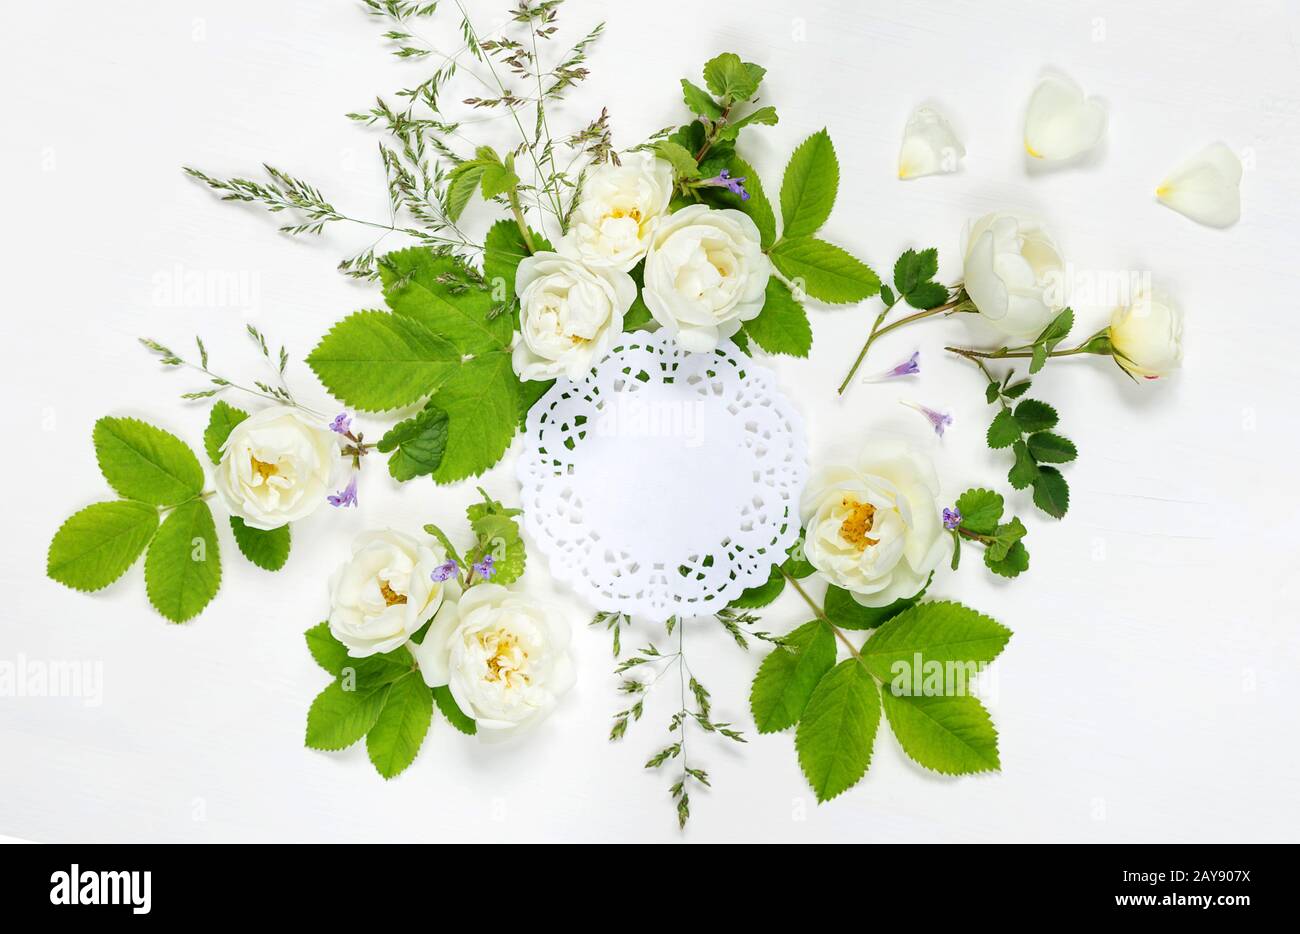 Composition with openwork doily and wild rose Stock Photo